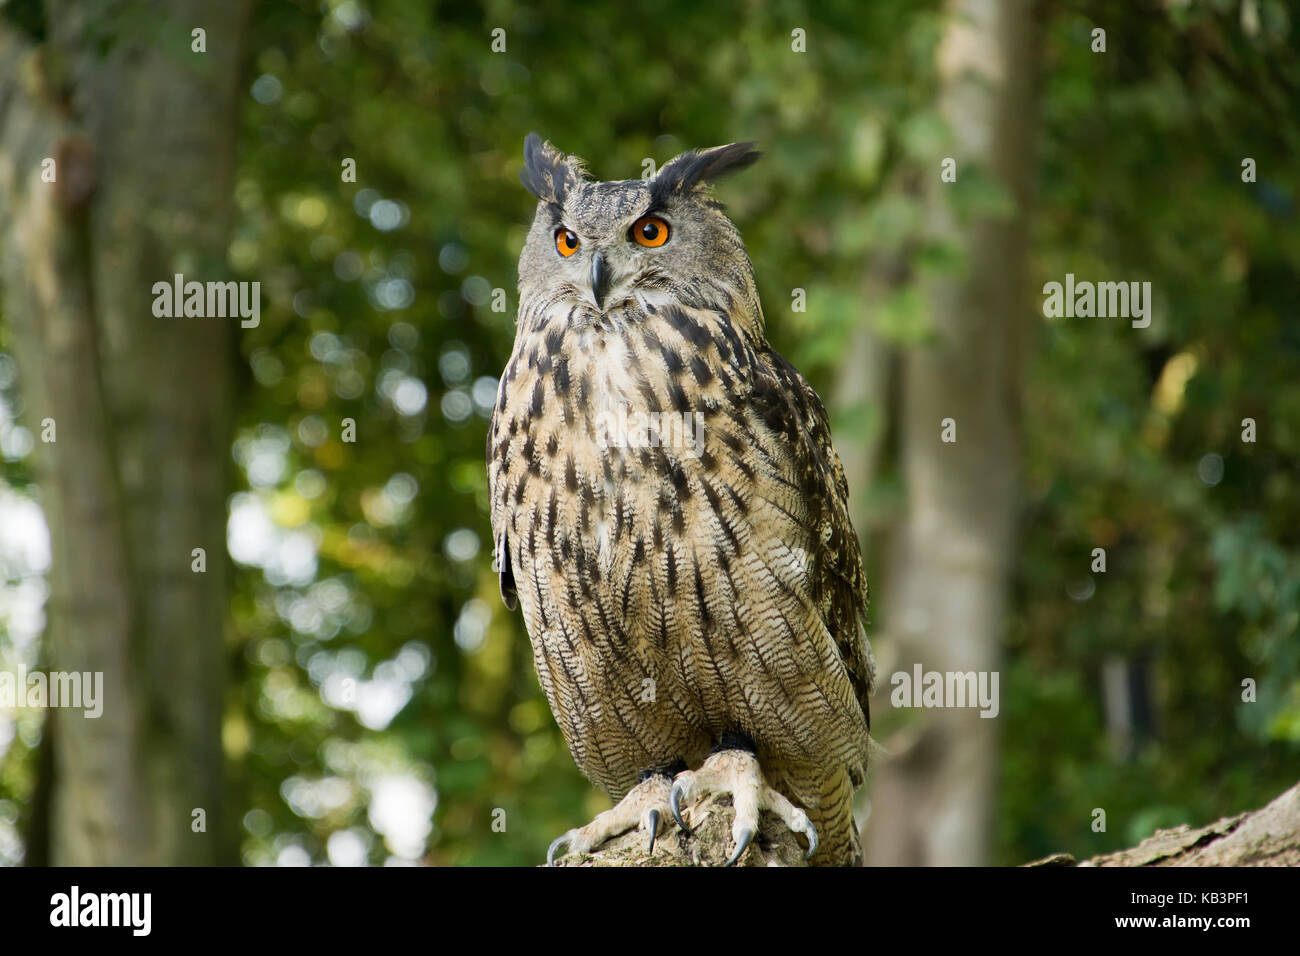 Uhu owl on a branch Stock Photo